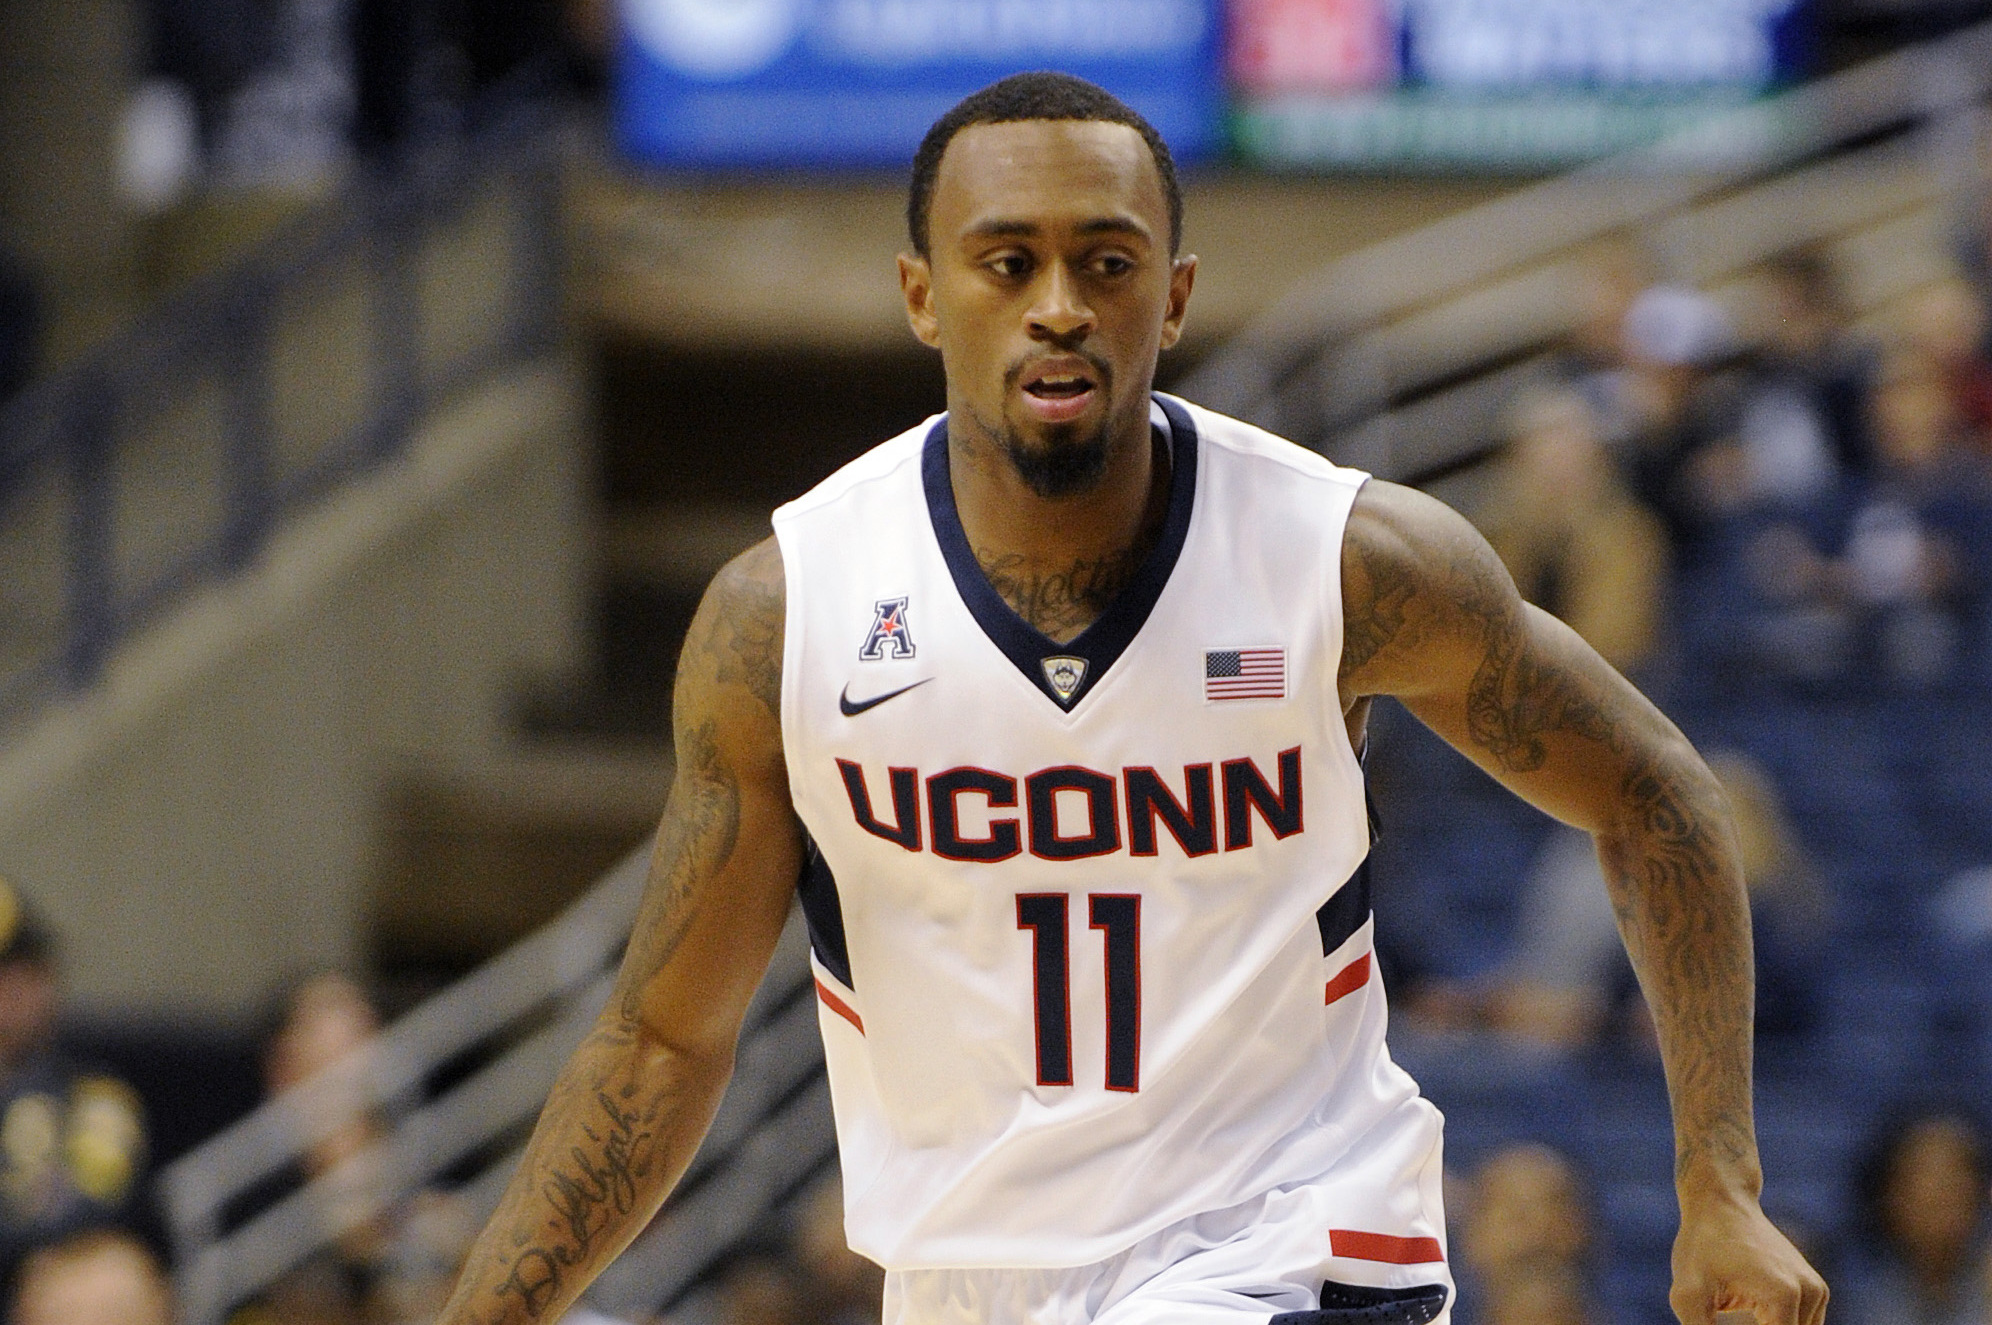 STORRS, (AP) — UConn's Ryan Boatright saw the screen that left Texas